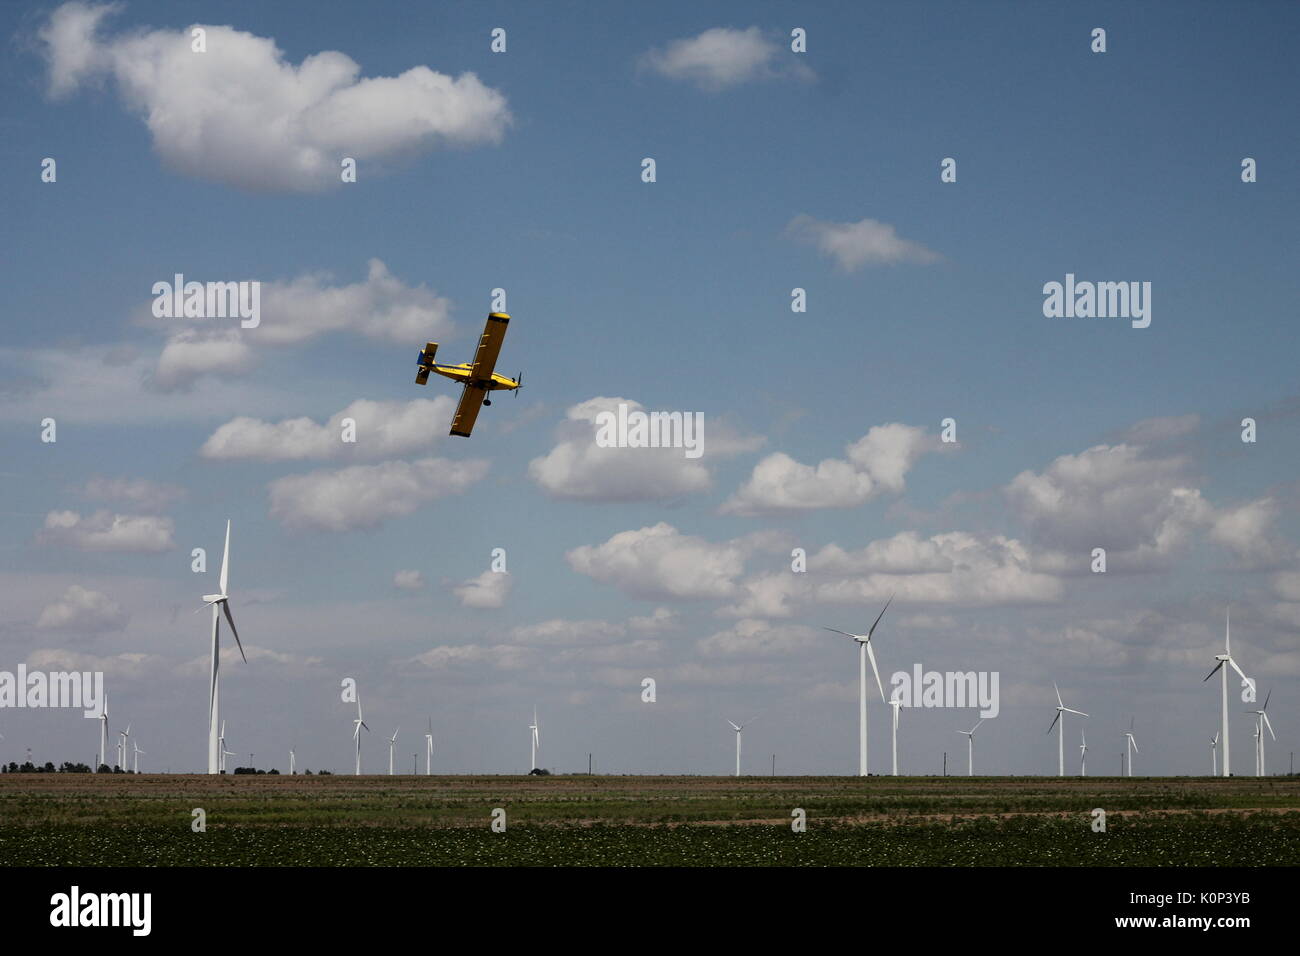 A cropduster on a low pass over his field. Stock Photo